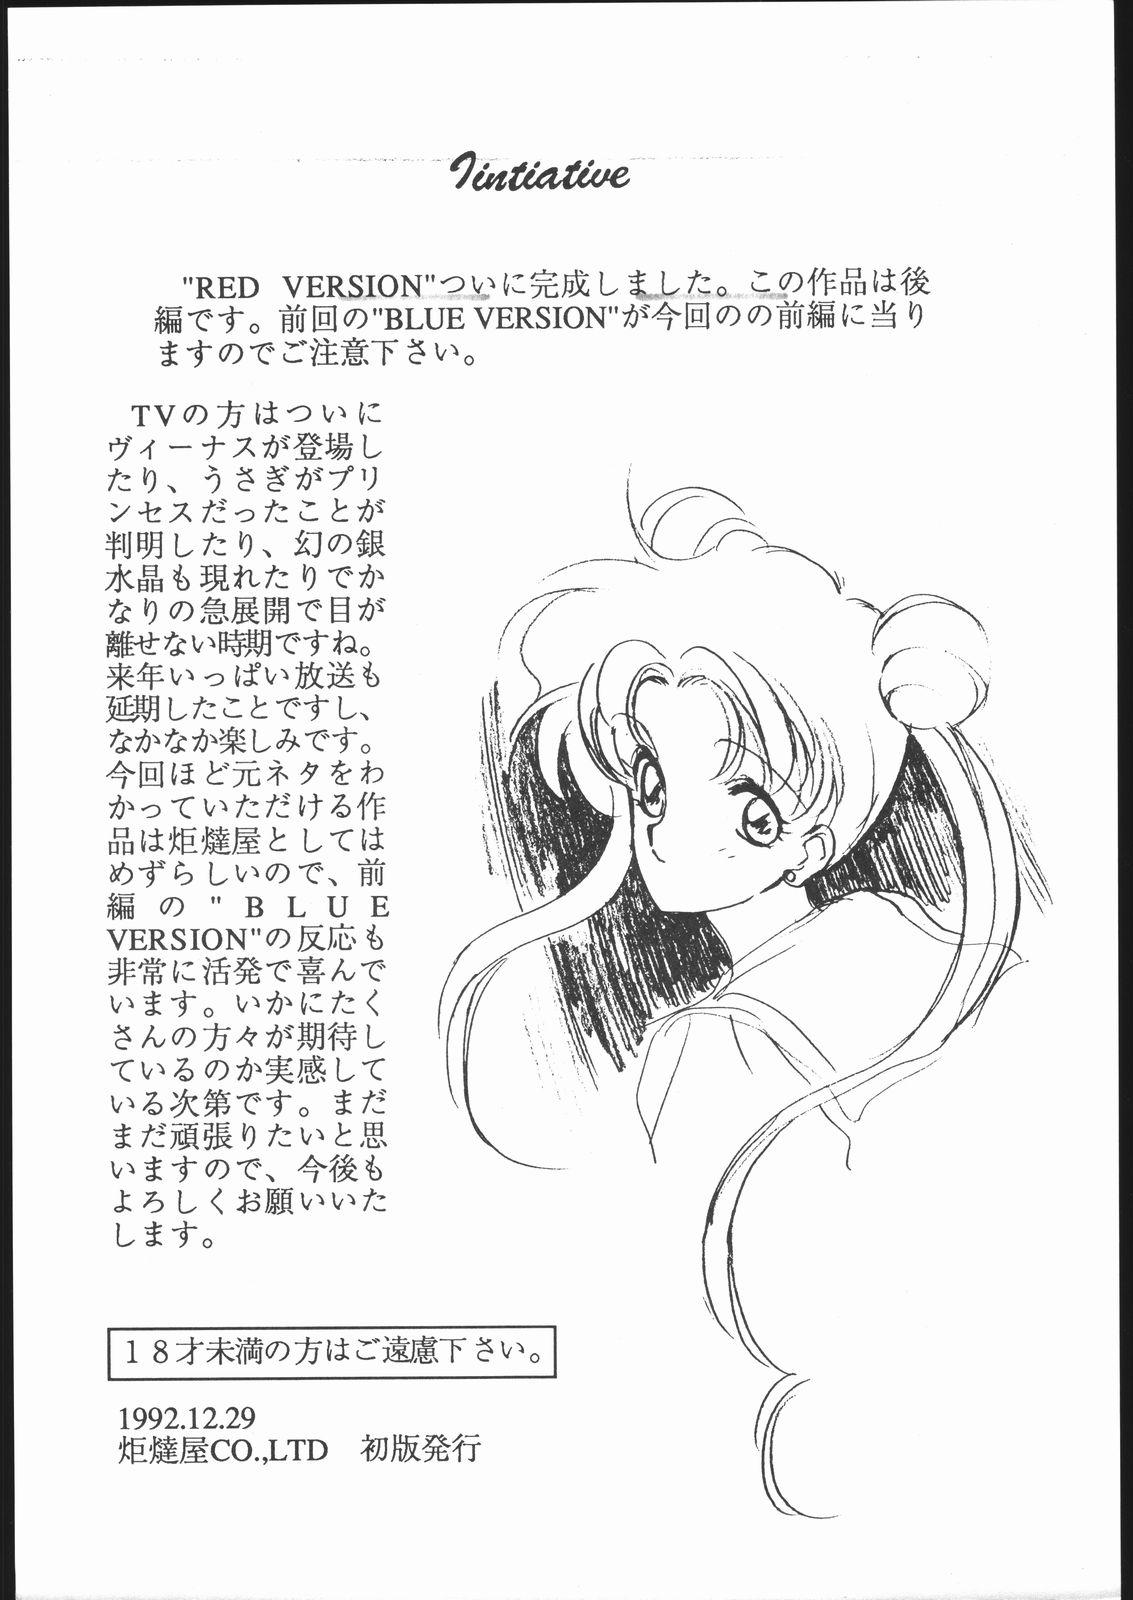 Funny SAILORS RED VERSION - Sailor moon Periscope - Page 2